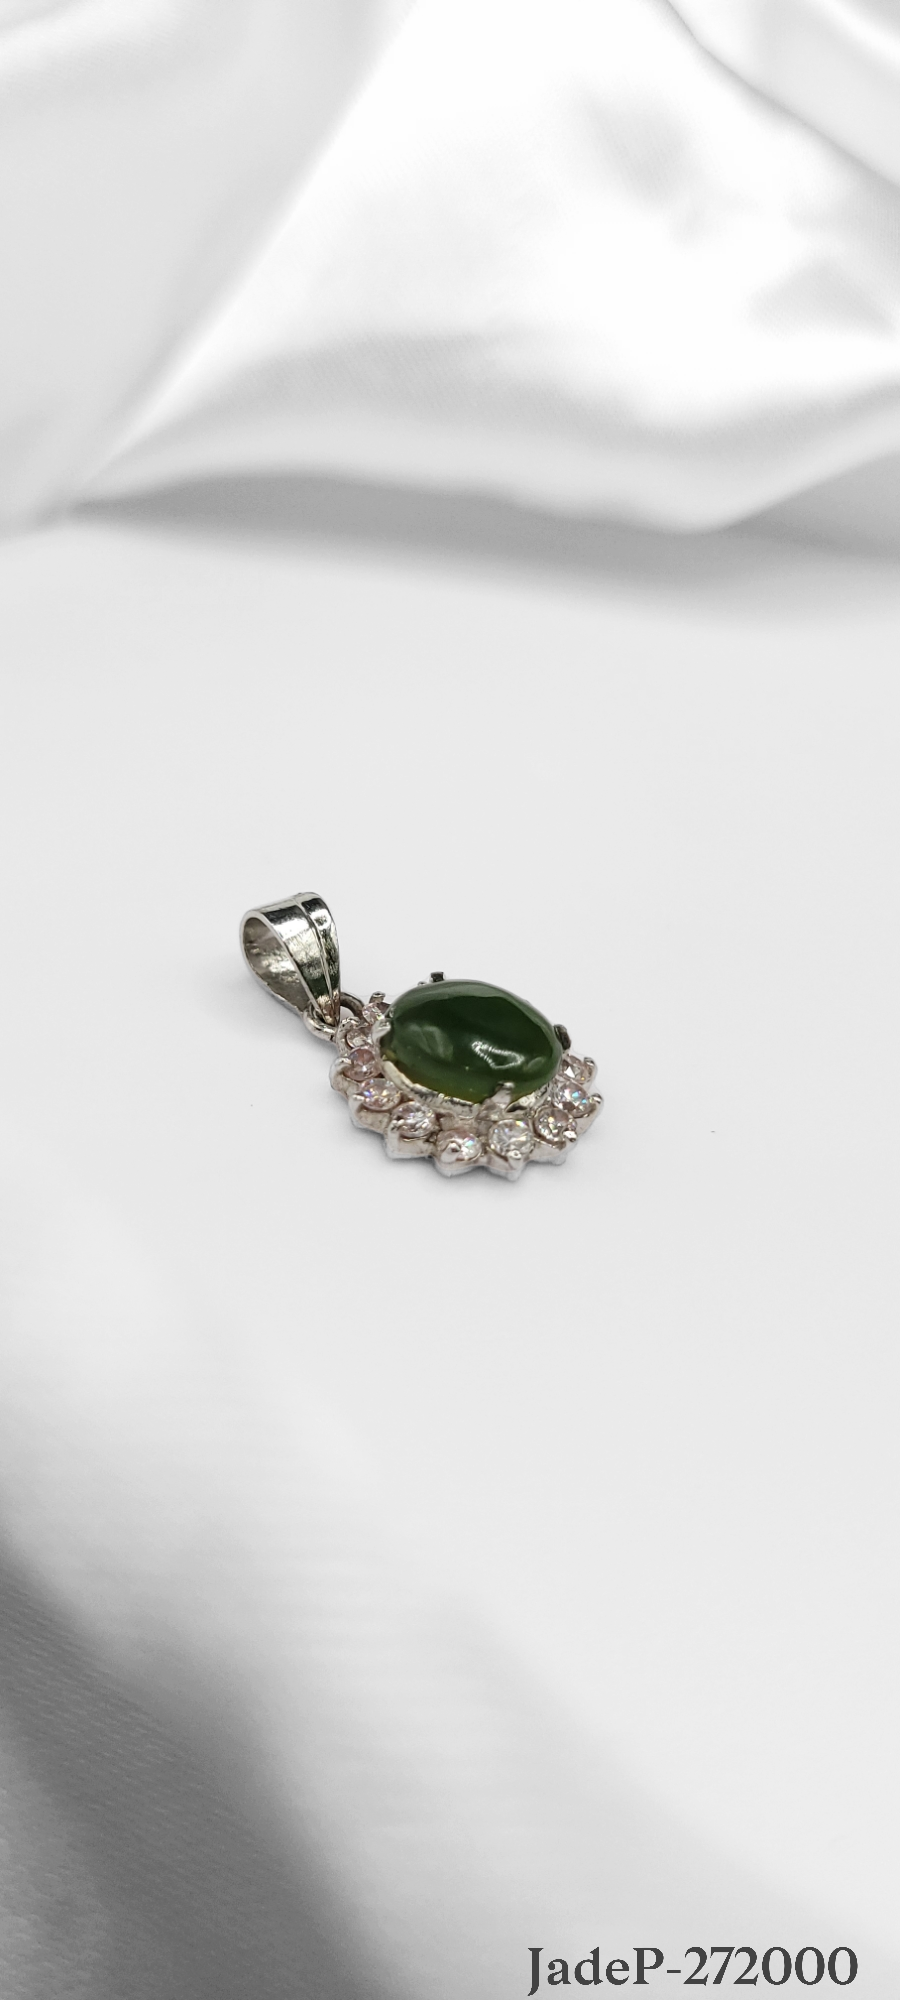 Jade stone encrusted with zirconia diamonds on sterling silver